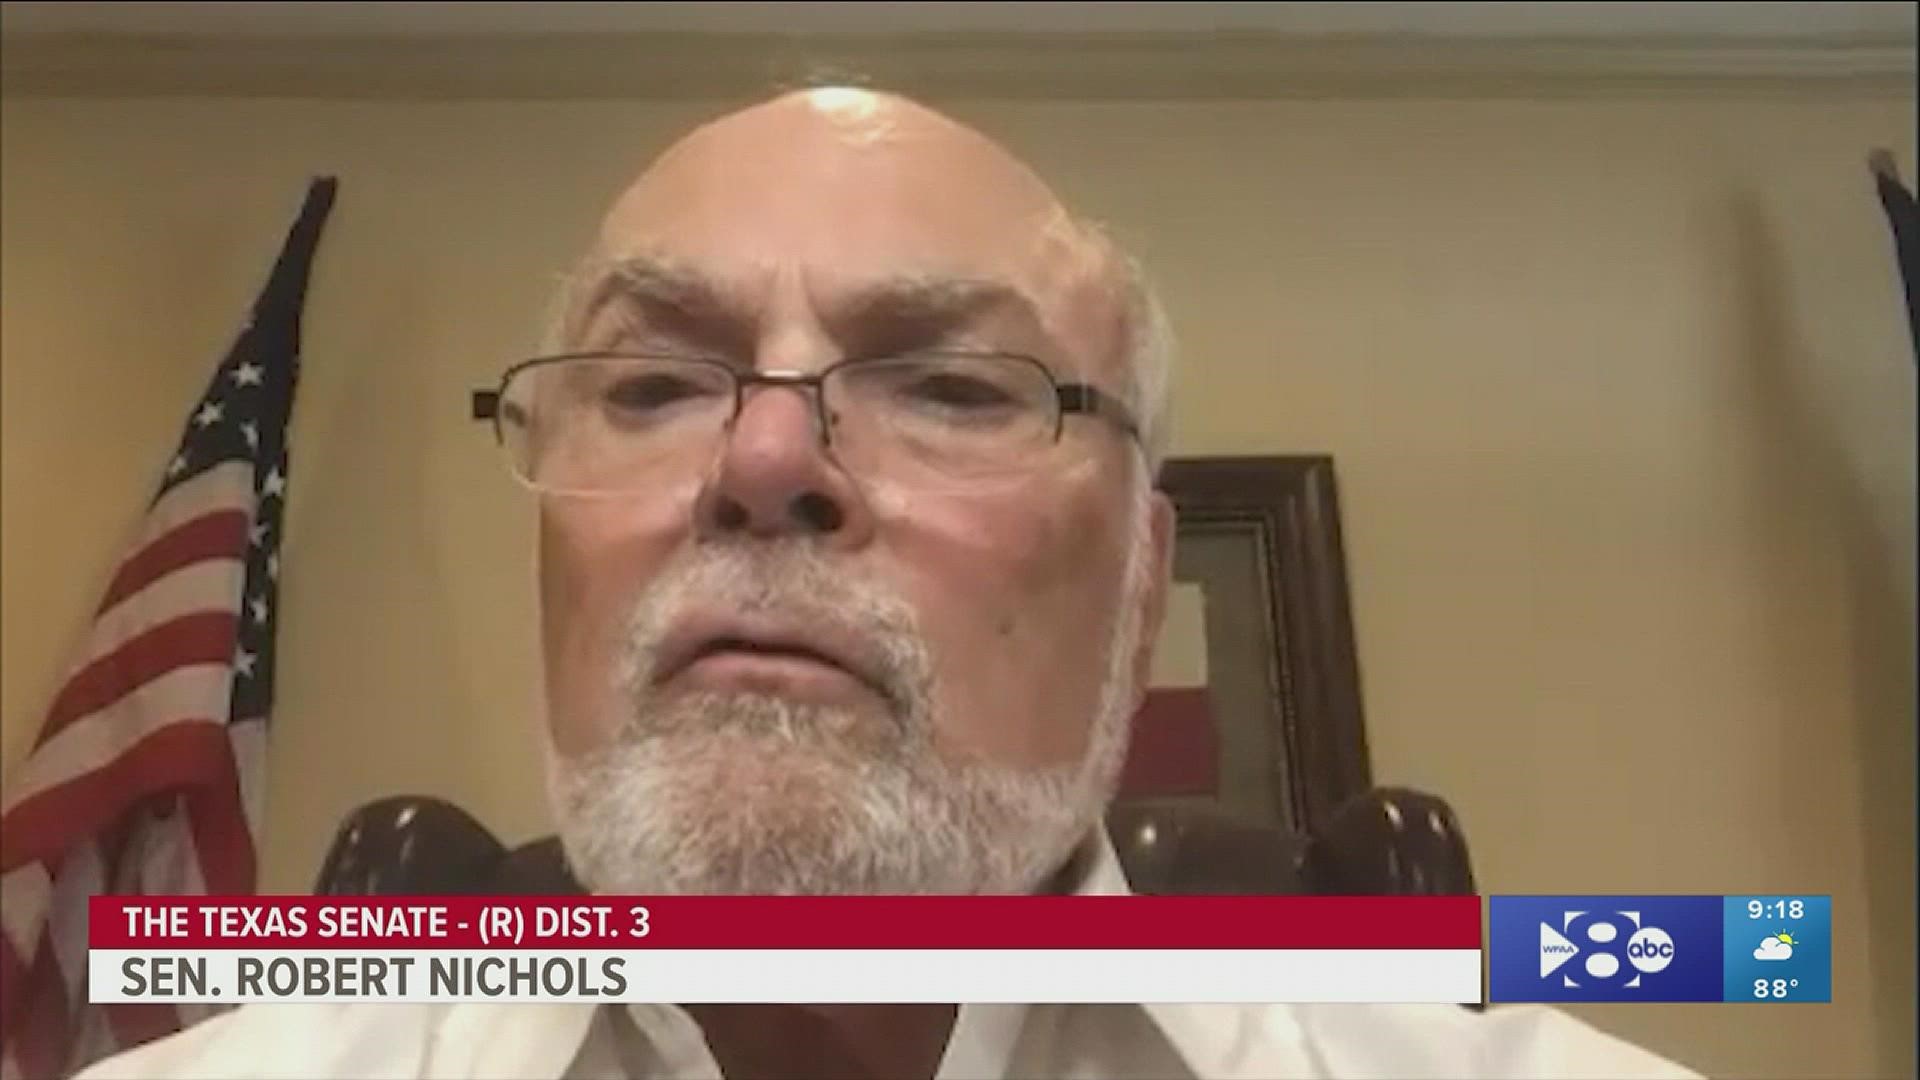 State Sen. Robert Nichols says it's too early to talk about possible recommendations after two days of hearings on the Uvalde school shooting investigation.